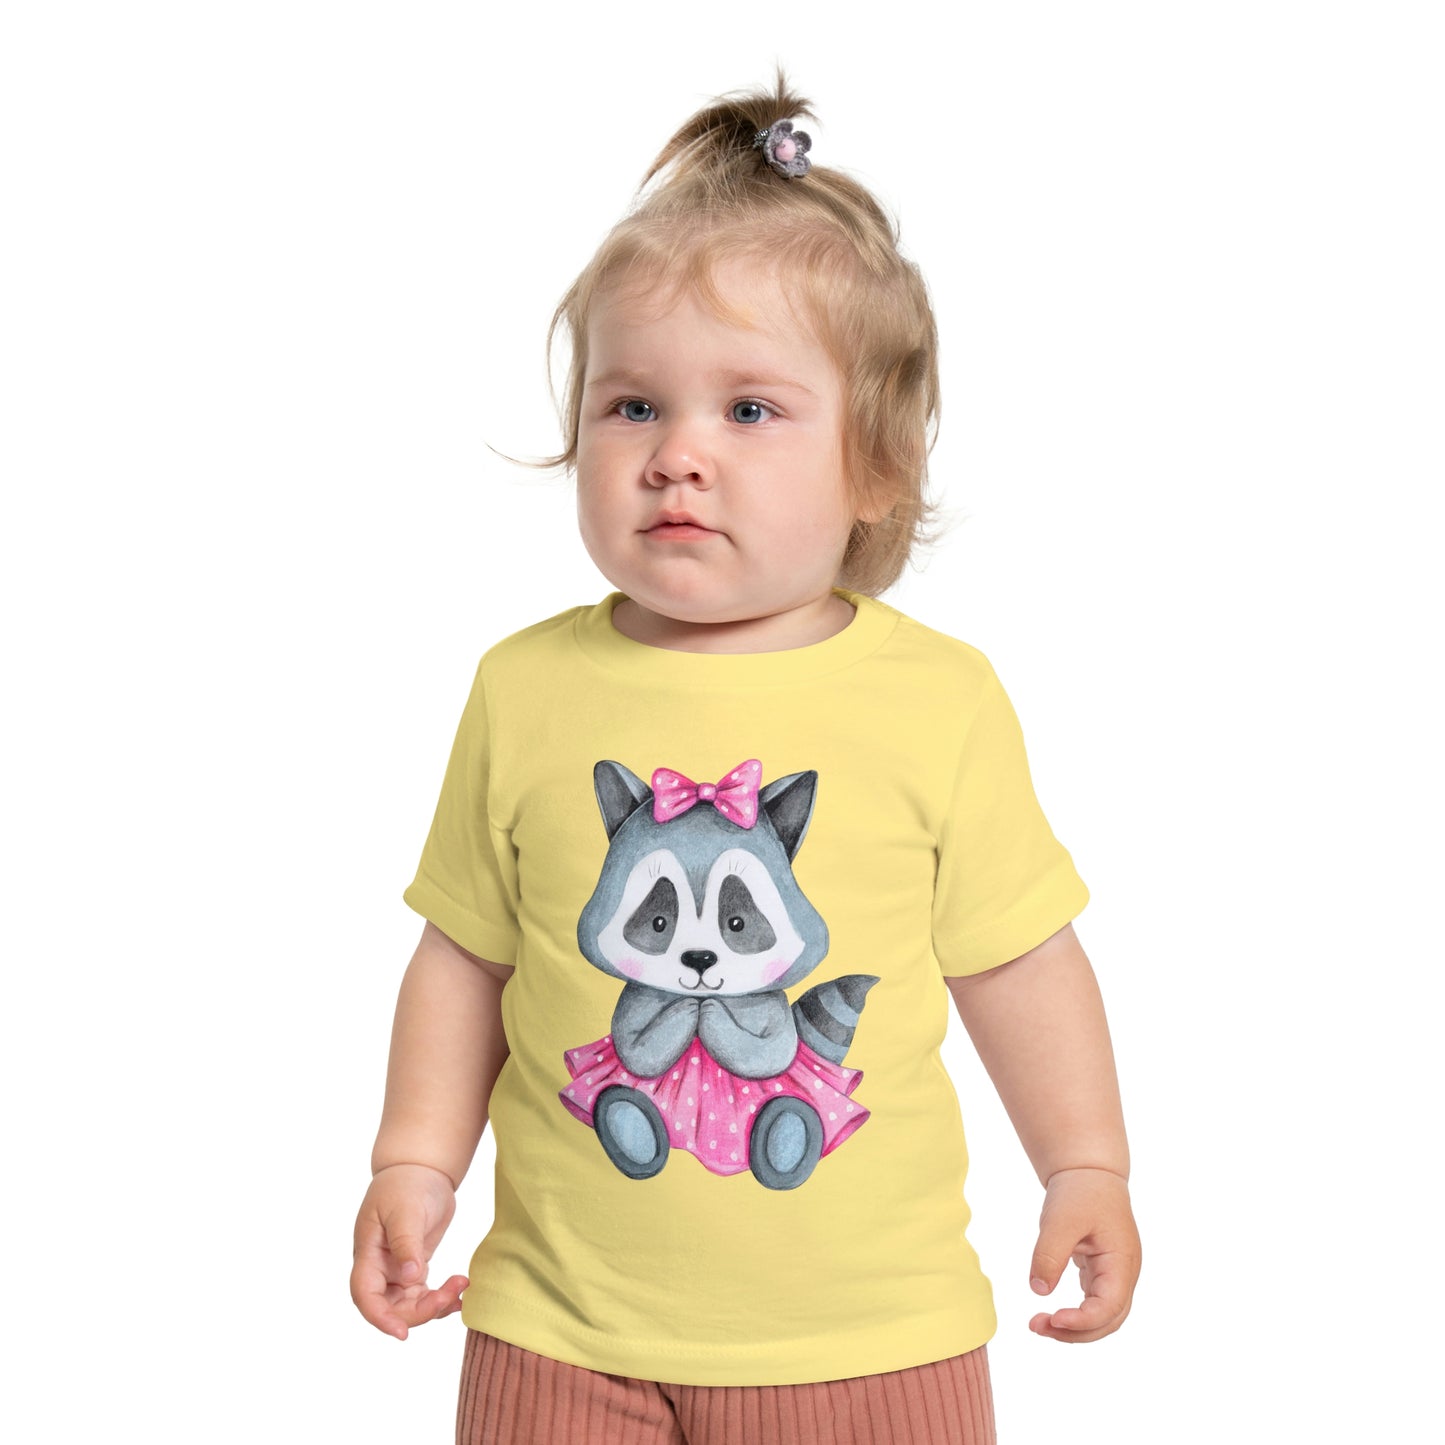 "Pink Girl Raccoon" Kid's T-Shirt - Weave Got Gifts - Unique Gifts You Won’t Find Anywhere Else!